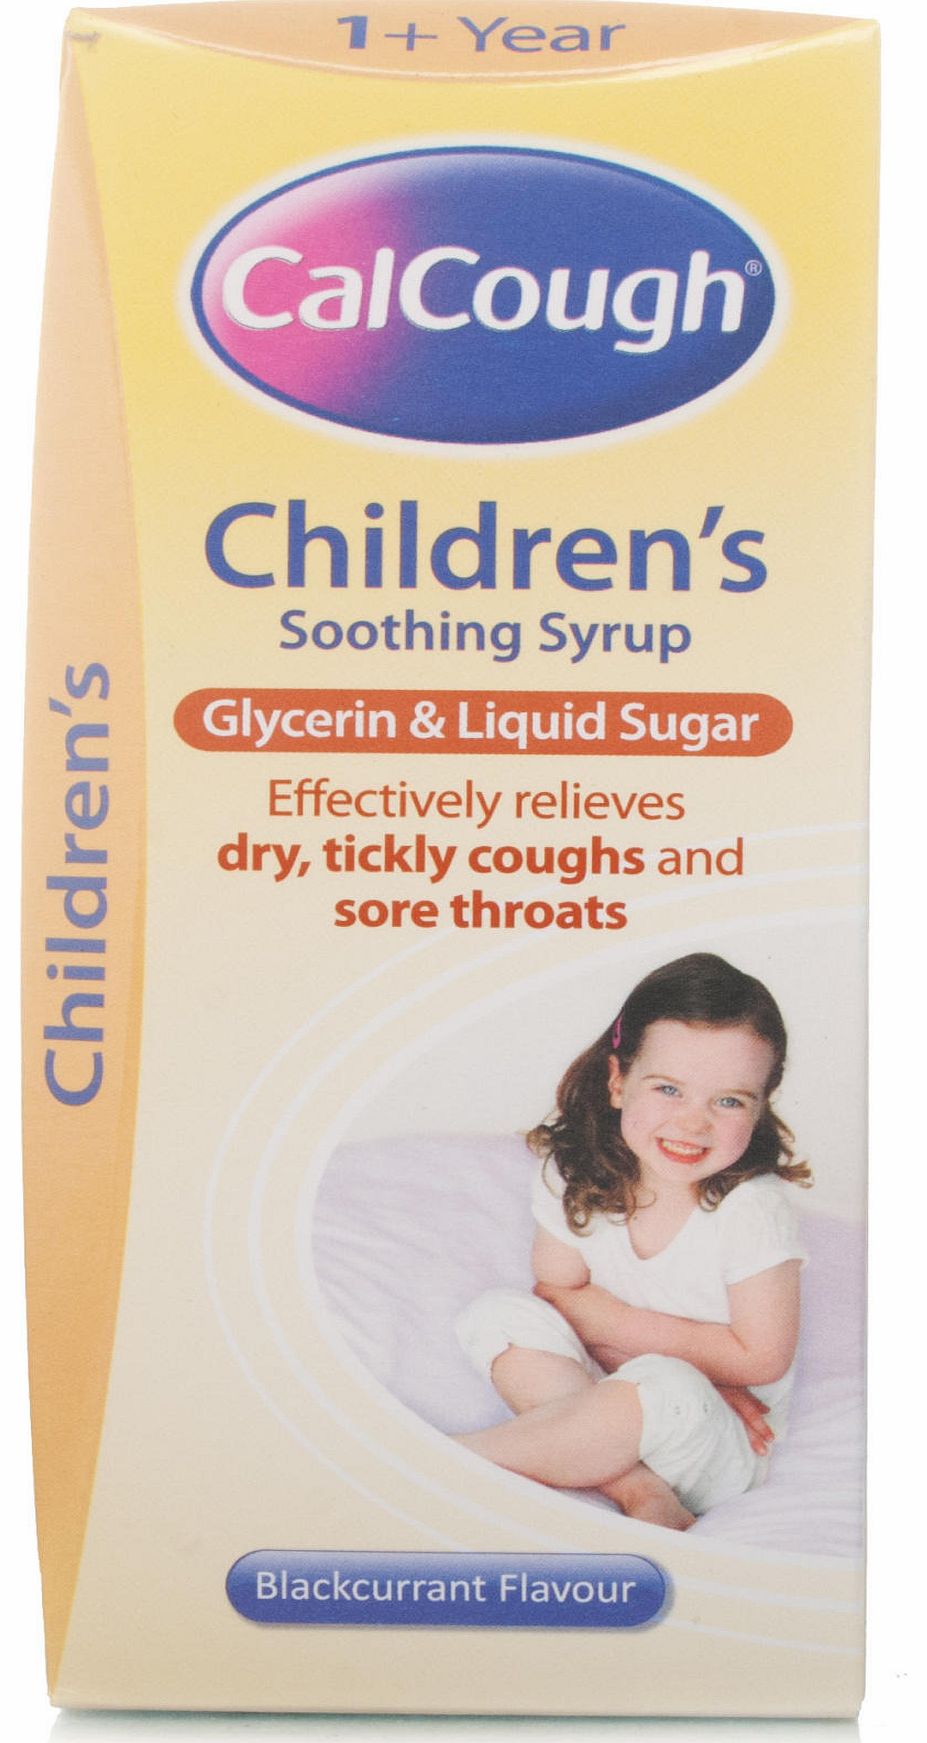 Calcough Childrens Soothing Syrup Blackcurrant